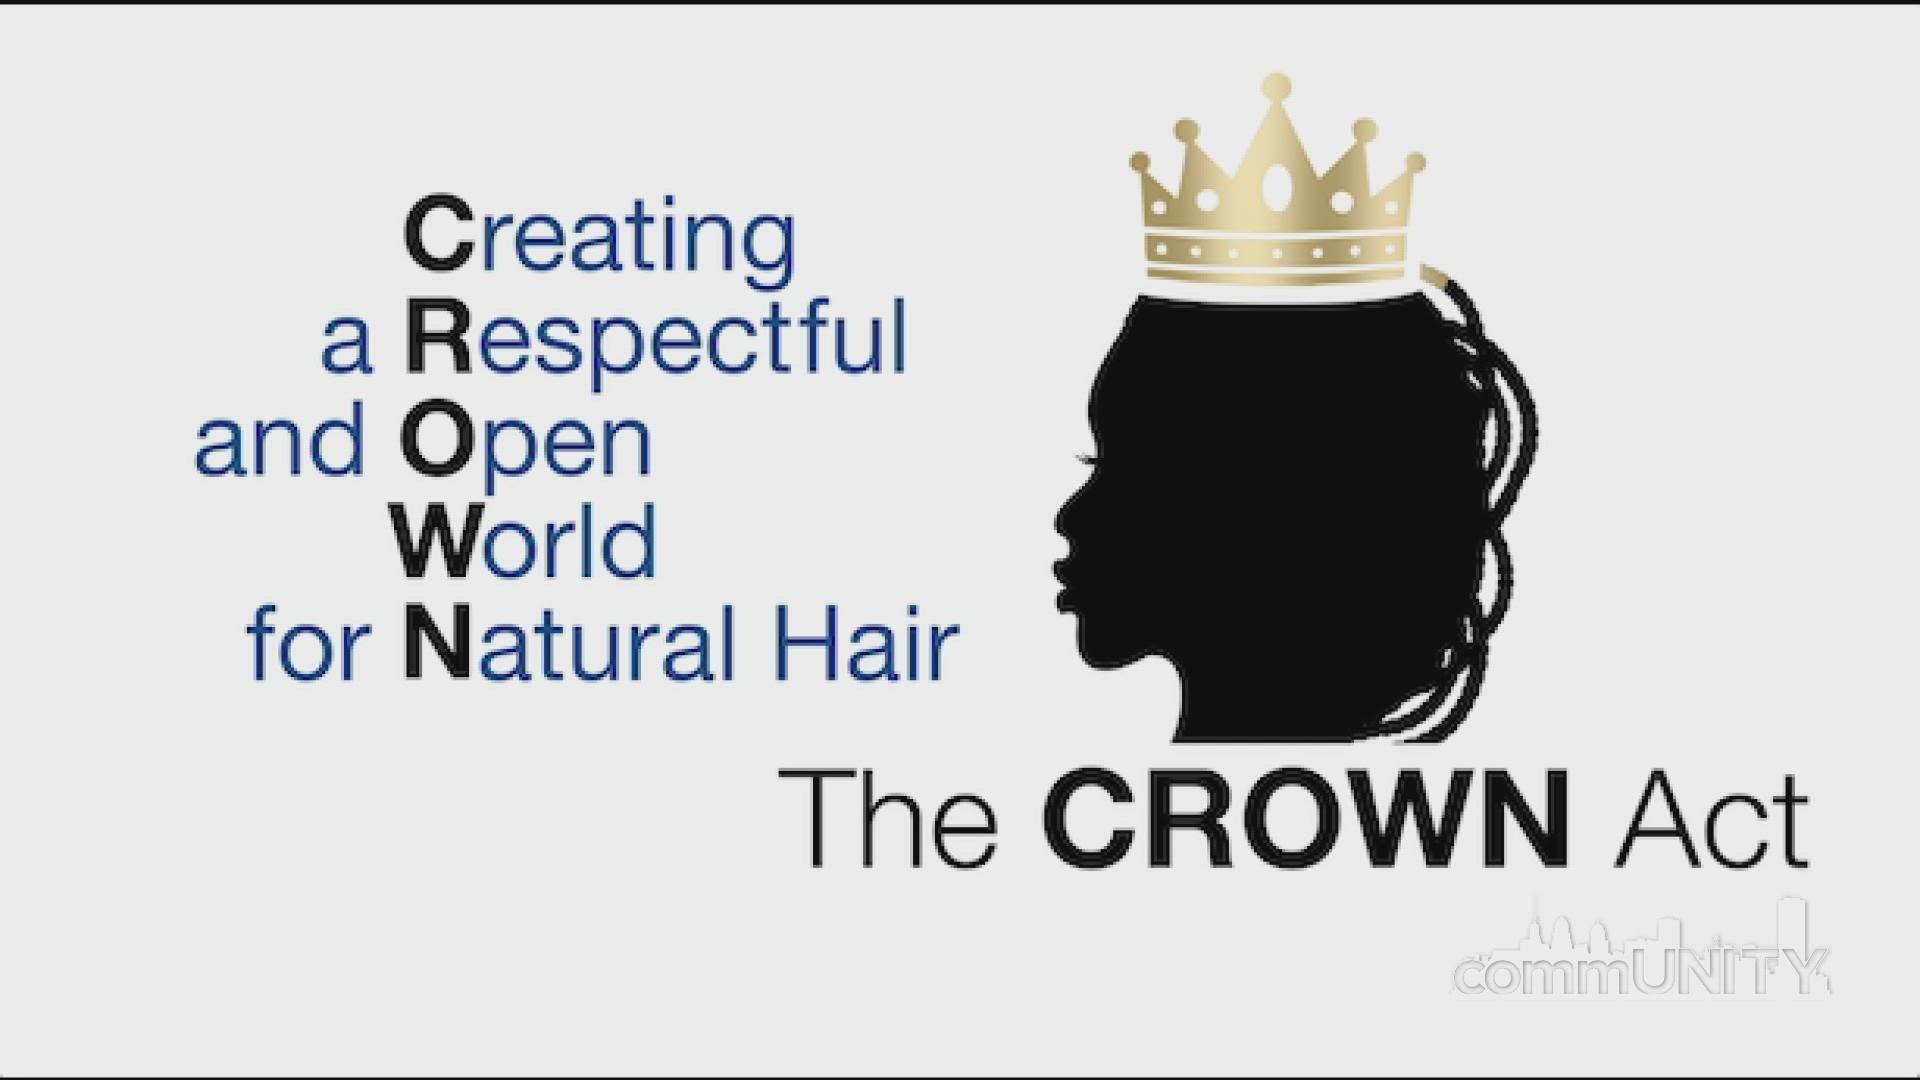 The CROWN Act stands for Creating a Respectful and Open World for Natural hair.